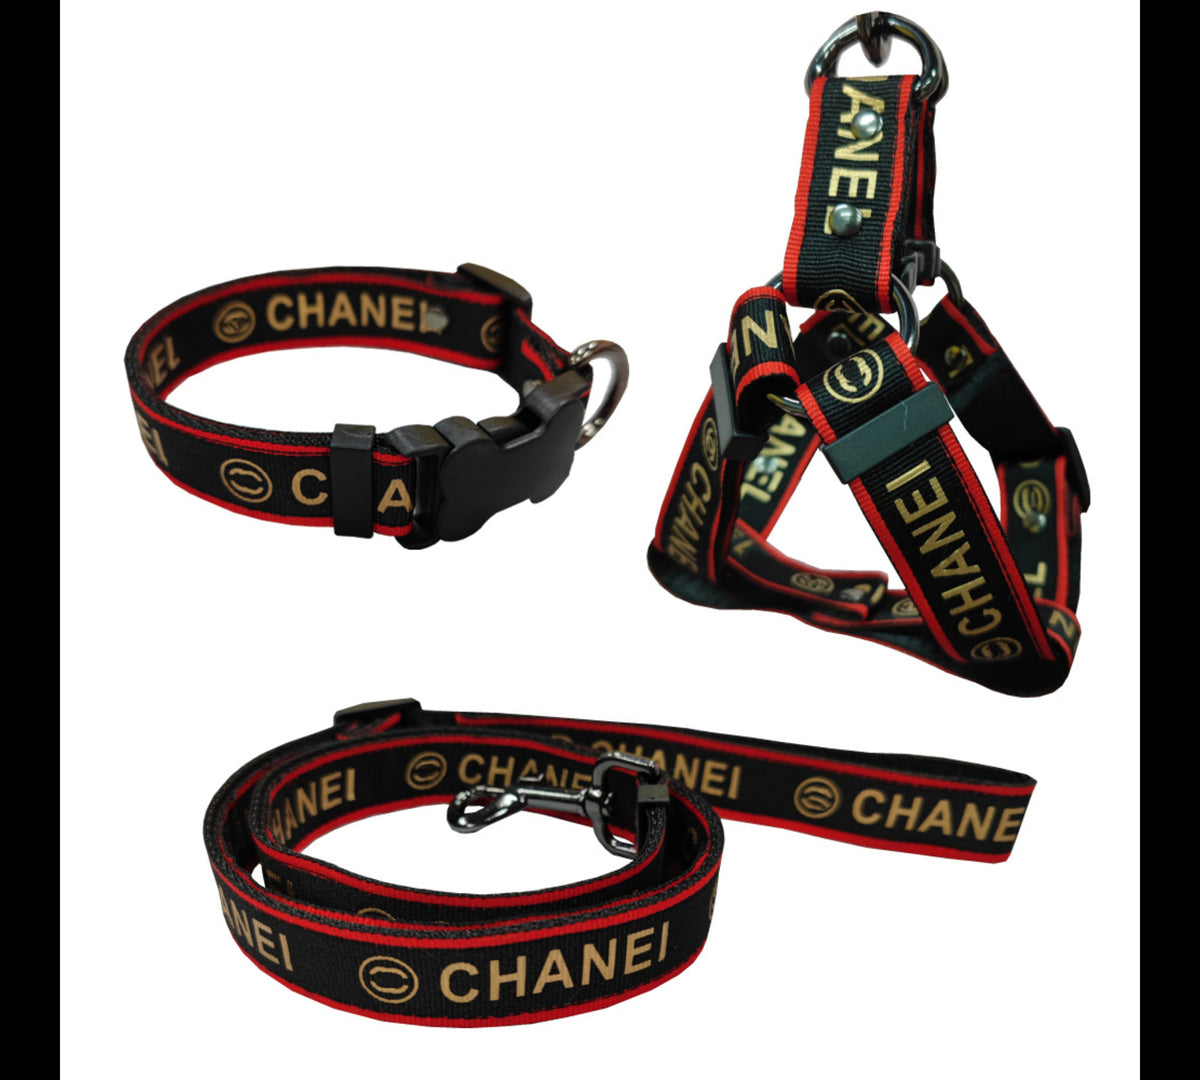 Buy Chanel Cat Online In India -  India